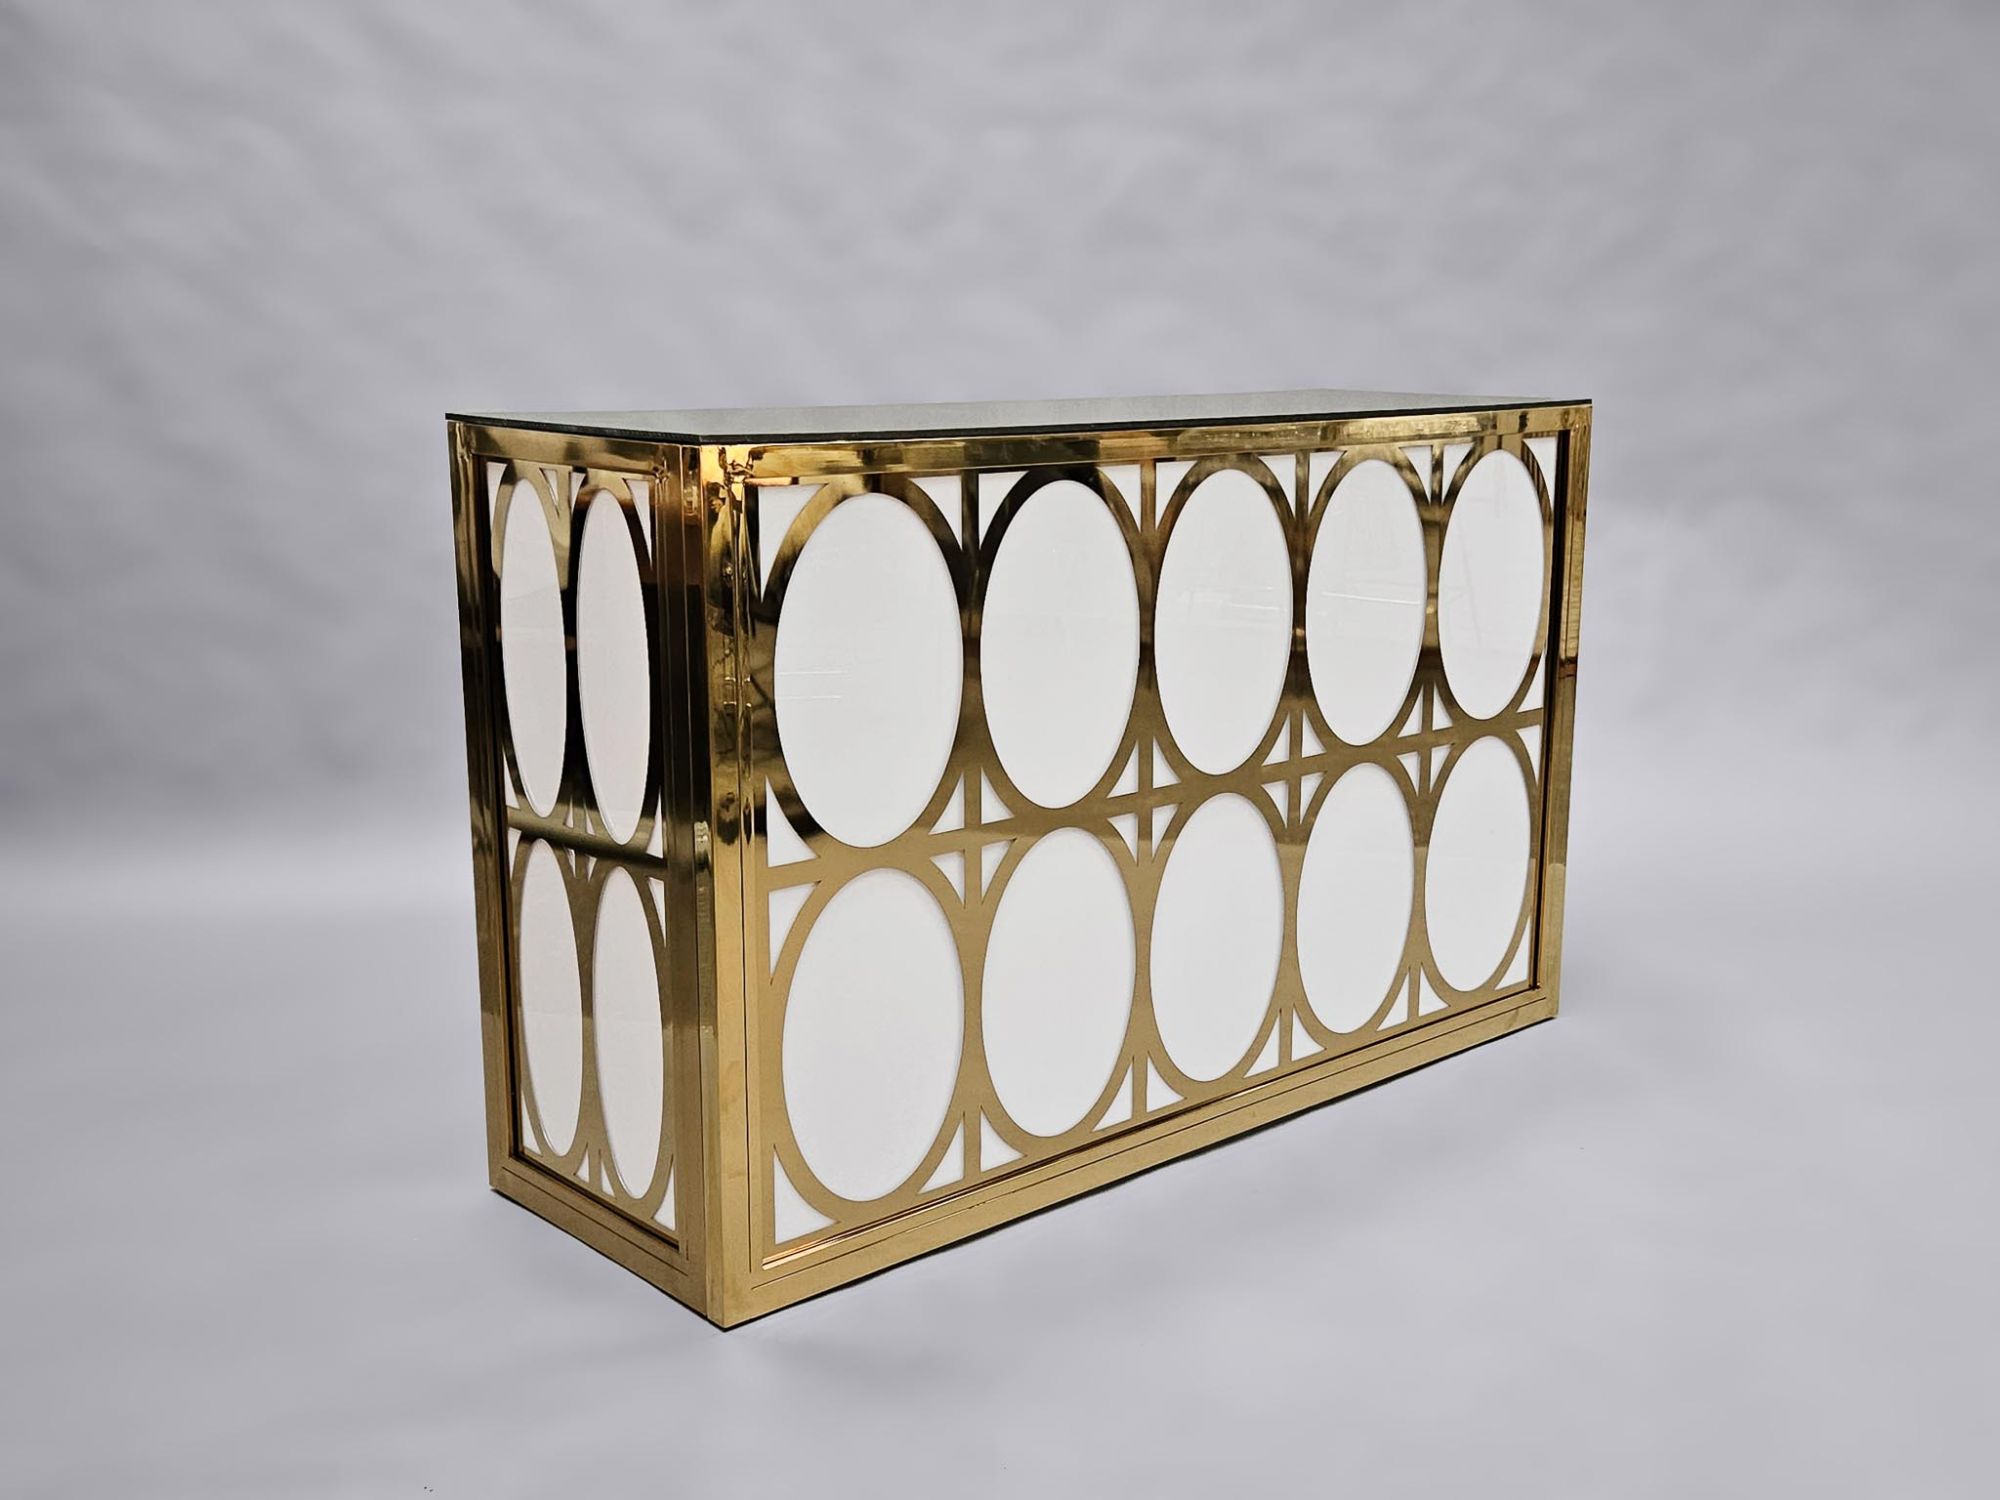 Furniture On The Move - white bar hire with gold detail in circular patterns